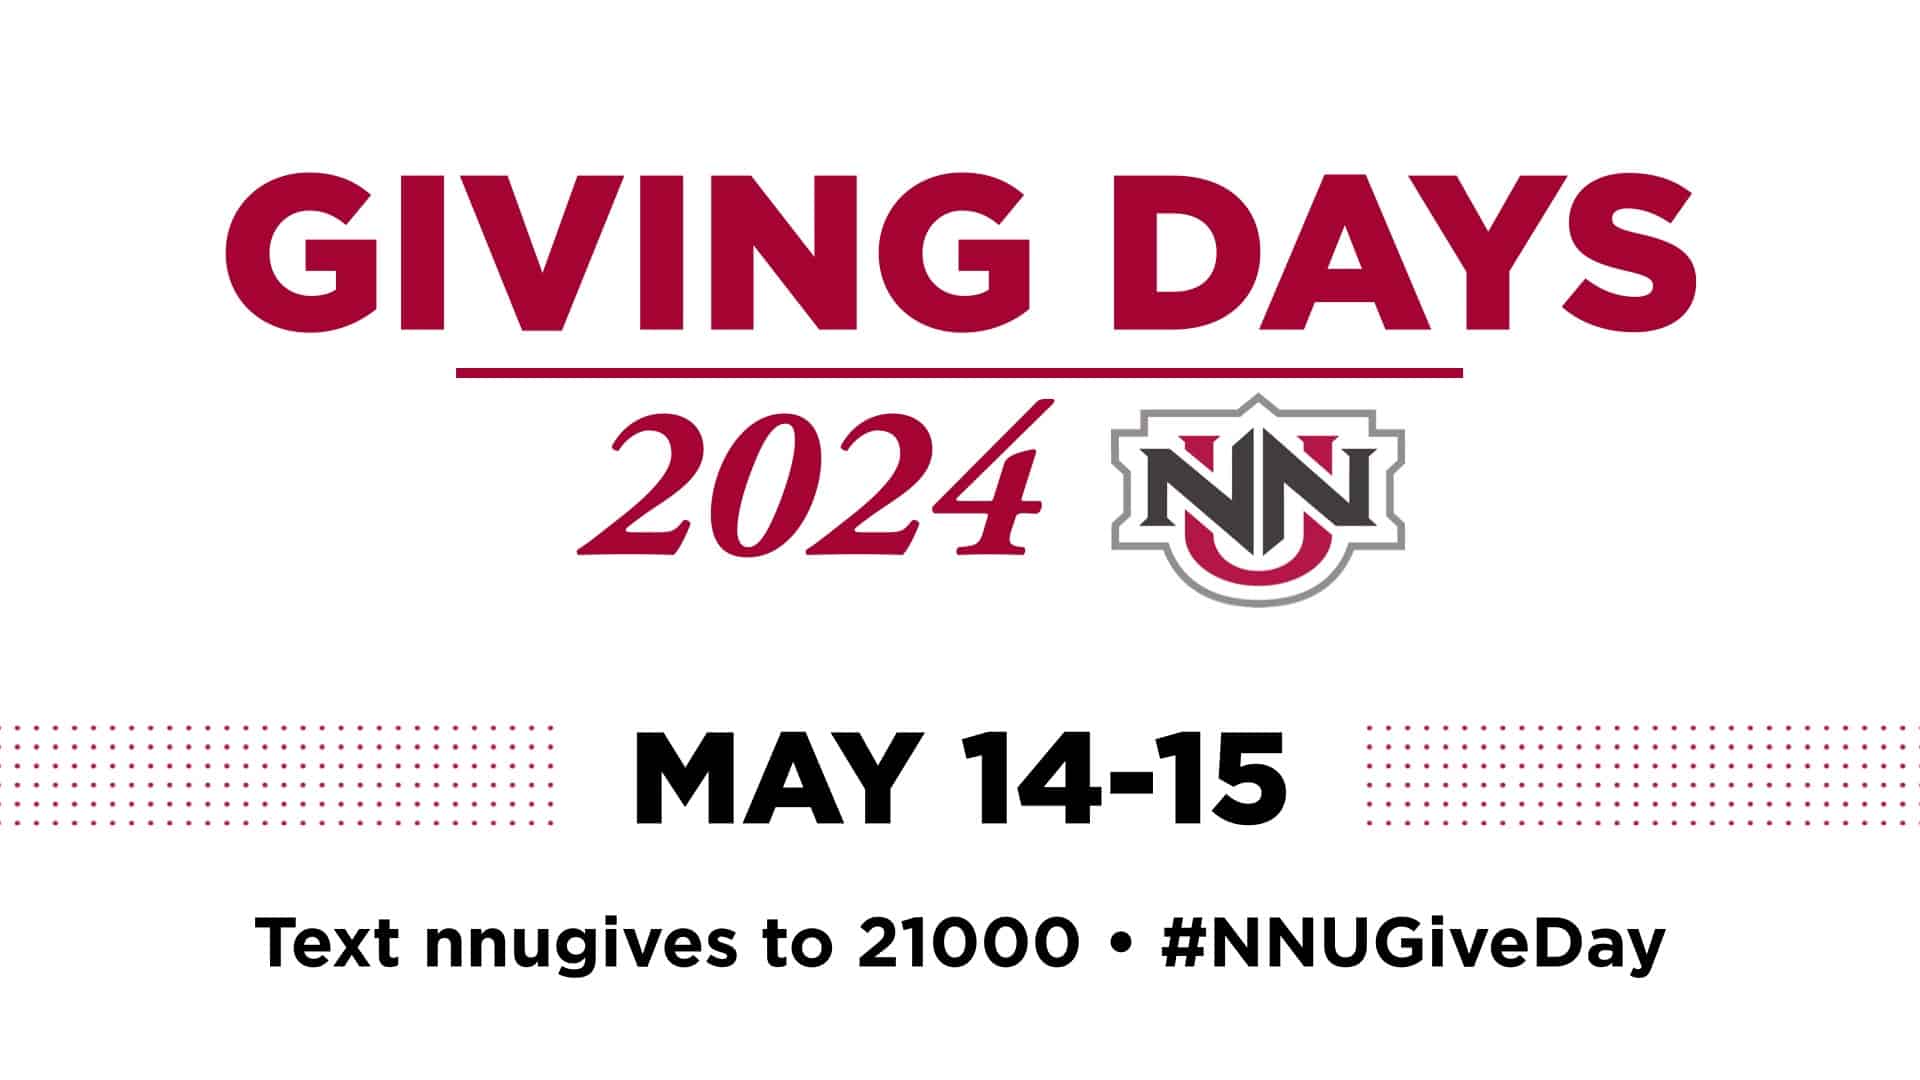 Giving Days 2024, May 14-15